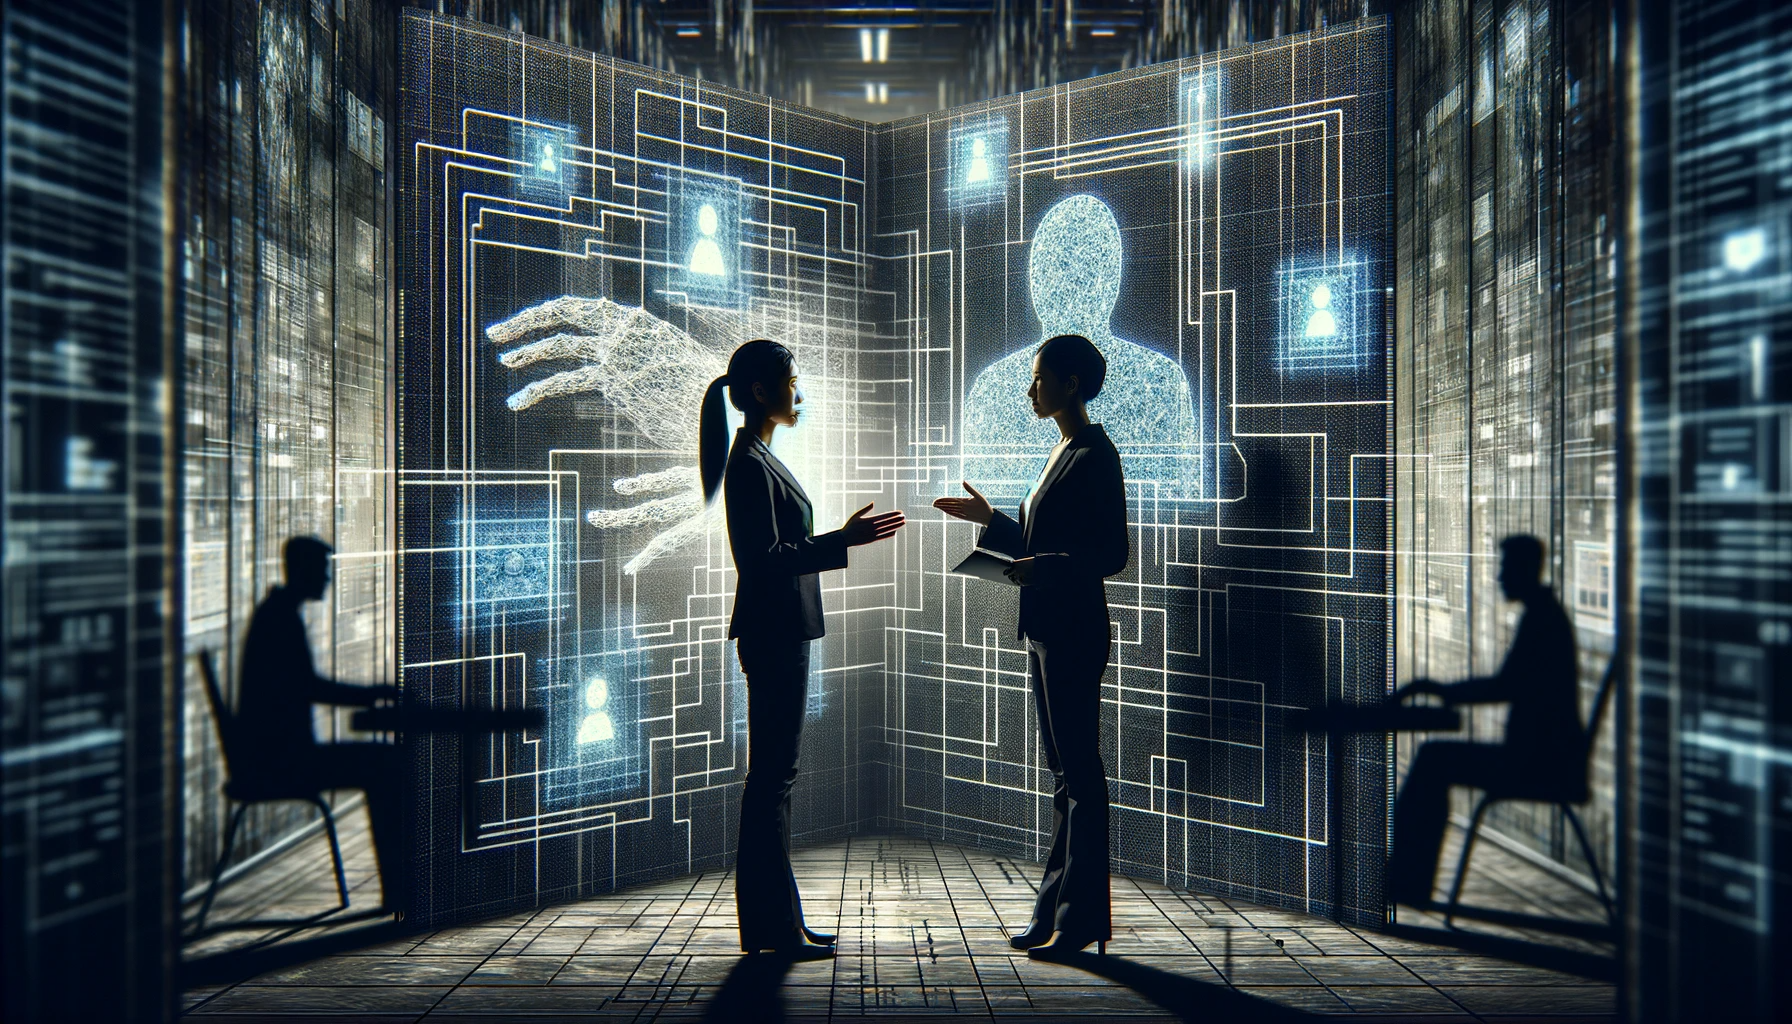 An Asian female cybersecurity expert stands in the foreground of a tech-inspired maze, symbolizing the complex challenges in her field. Behind her, a high wall with digital patterns represents the 'challenge wall' she must overcome. She's engaged in a meaningful conversation with a shadowy figure across the table, symbolizing the communication aspect of her work. The environment suggests a high-pressure tech industry, with abstract elements symbolizing trust, such as interconnected nodes or hands reaching towards each other, subtly integrated into the background. The overall atmosphere conveys a sense of overcoming adversity through communication, expertise, and trust-building within the cybersecurity realm.